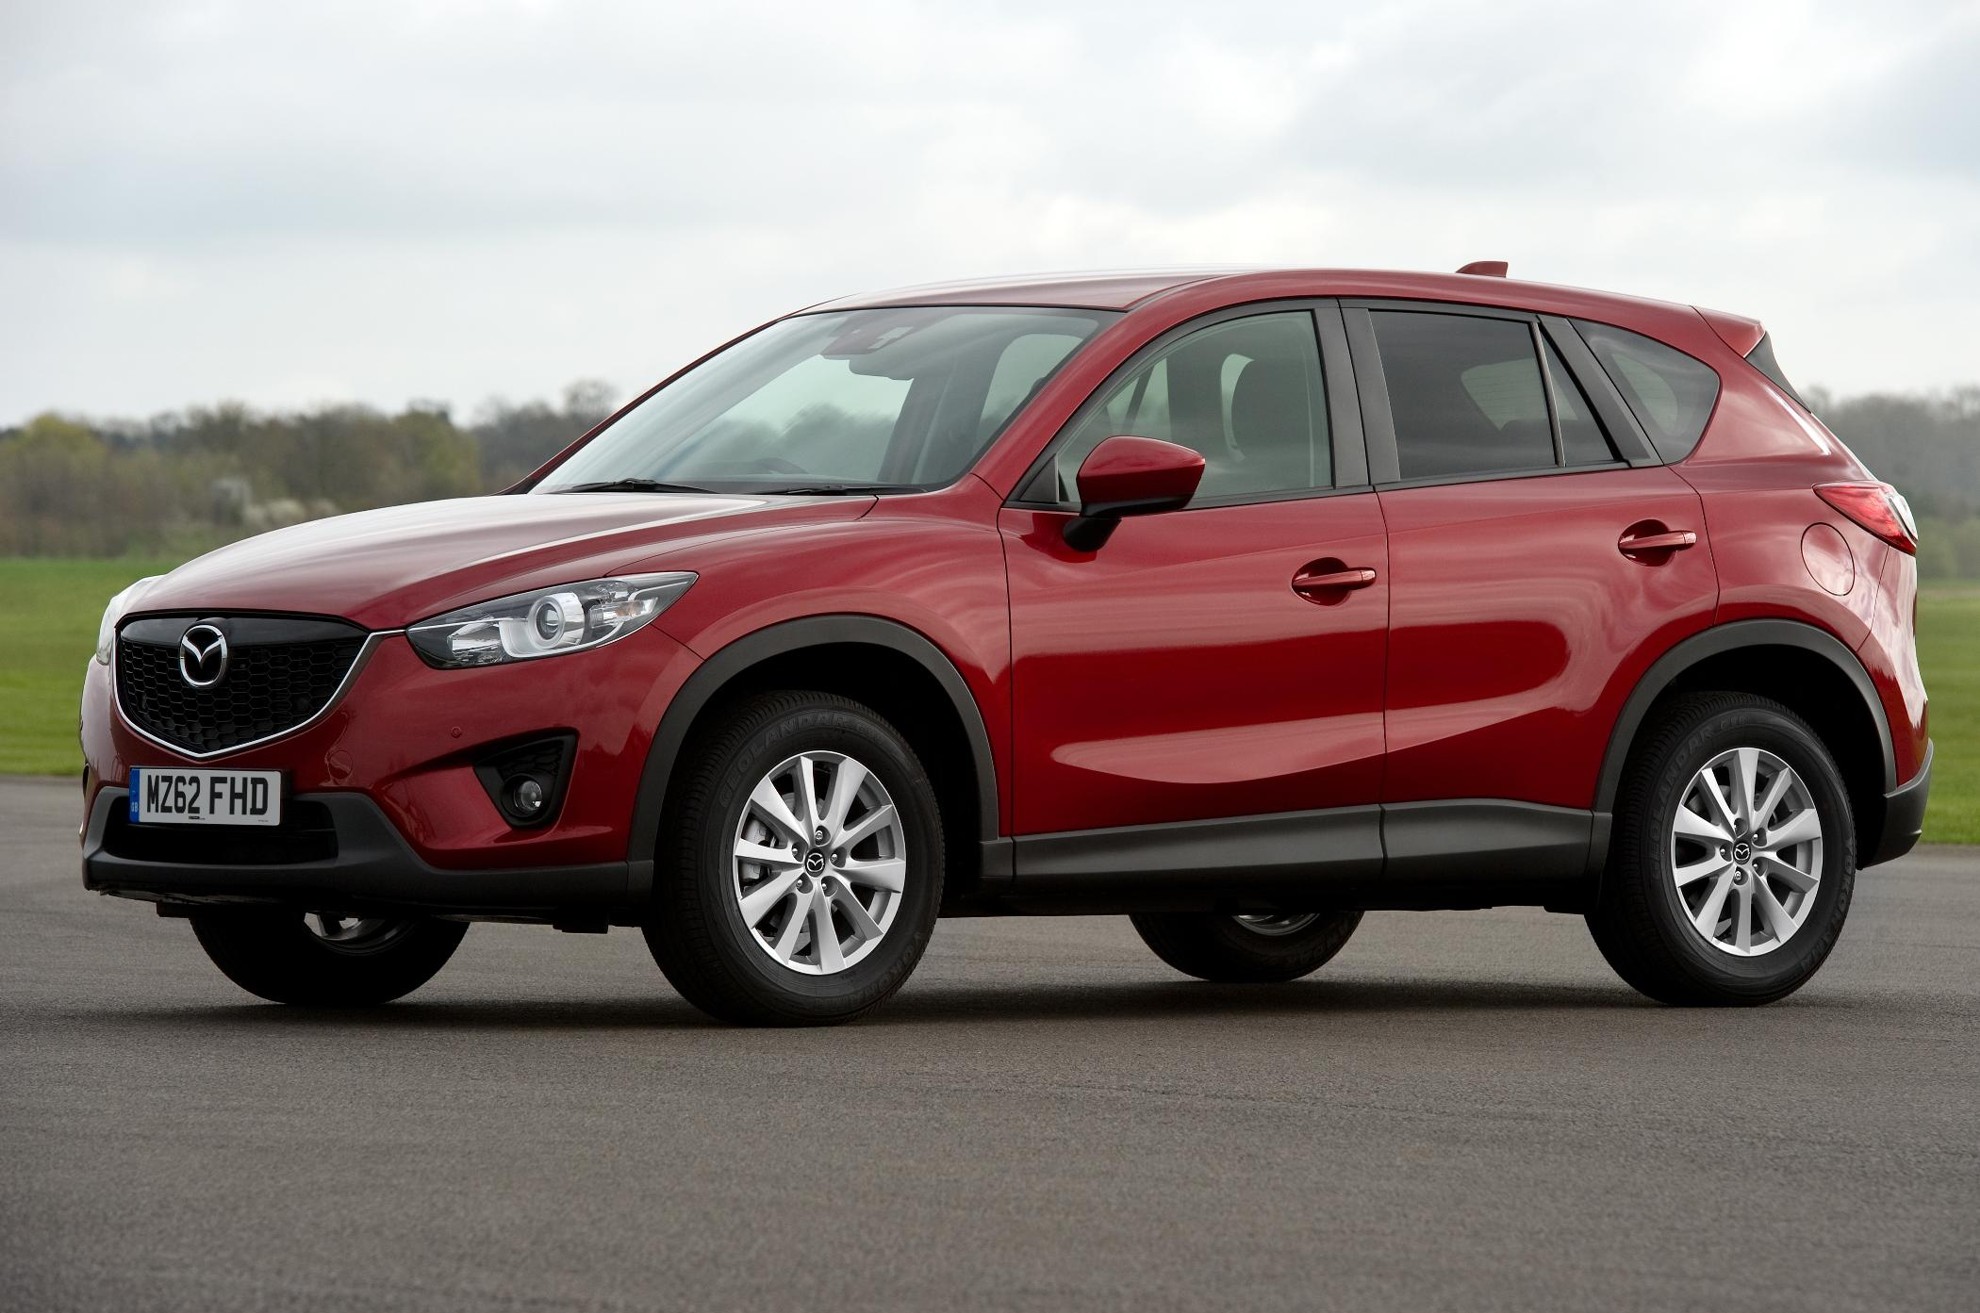 CARS FOR SALE – MAZDA CX-5 WINS ‘BEST BUY’ SUV AWARD FROM WHAT CAR?